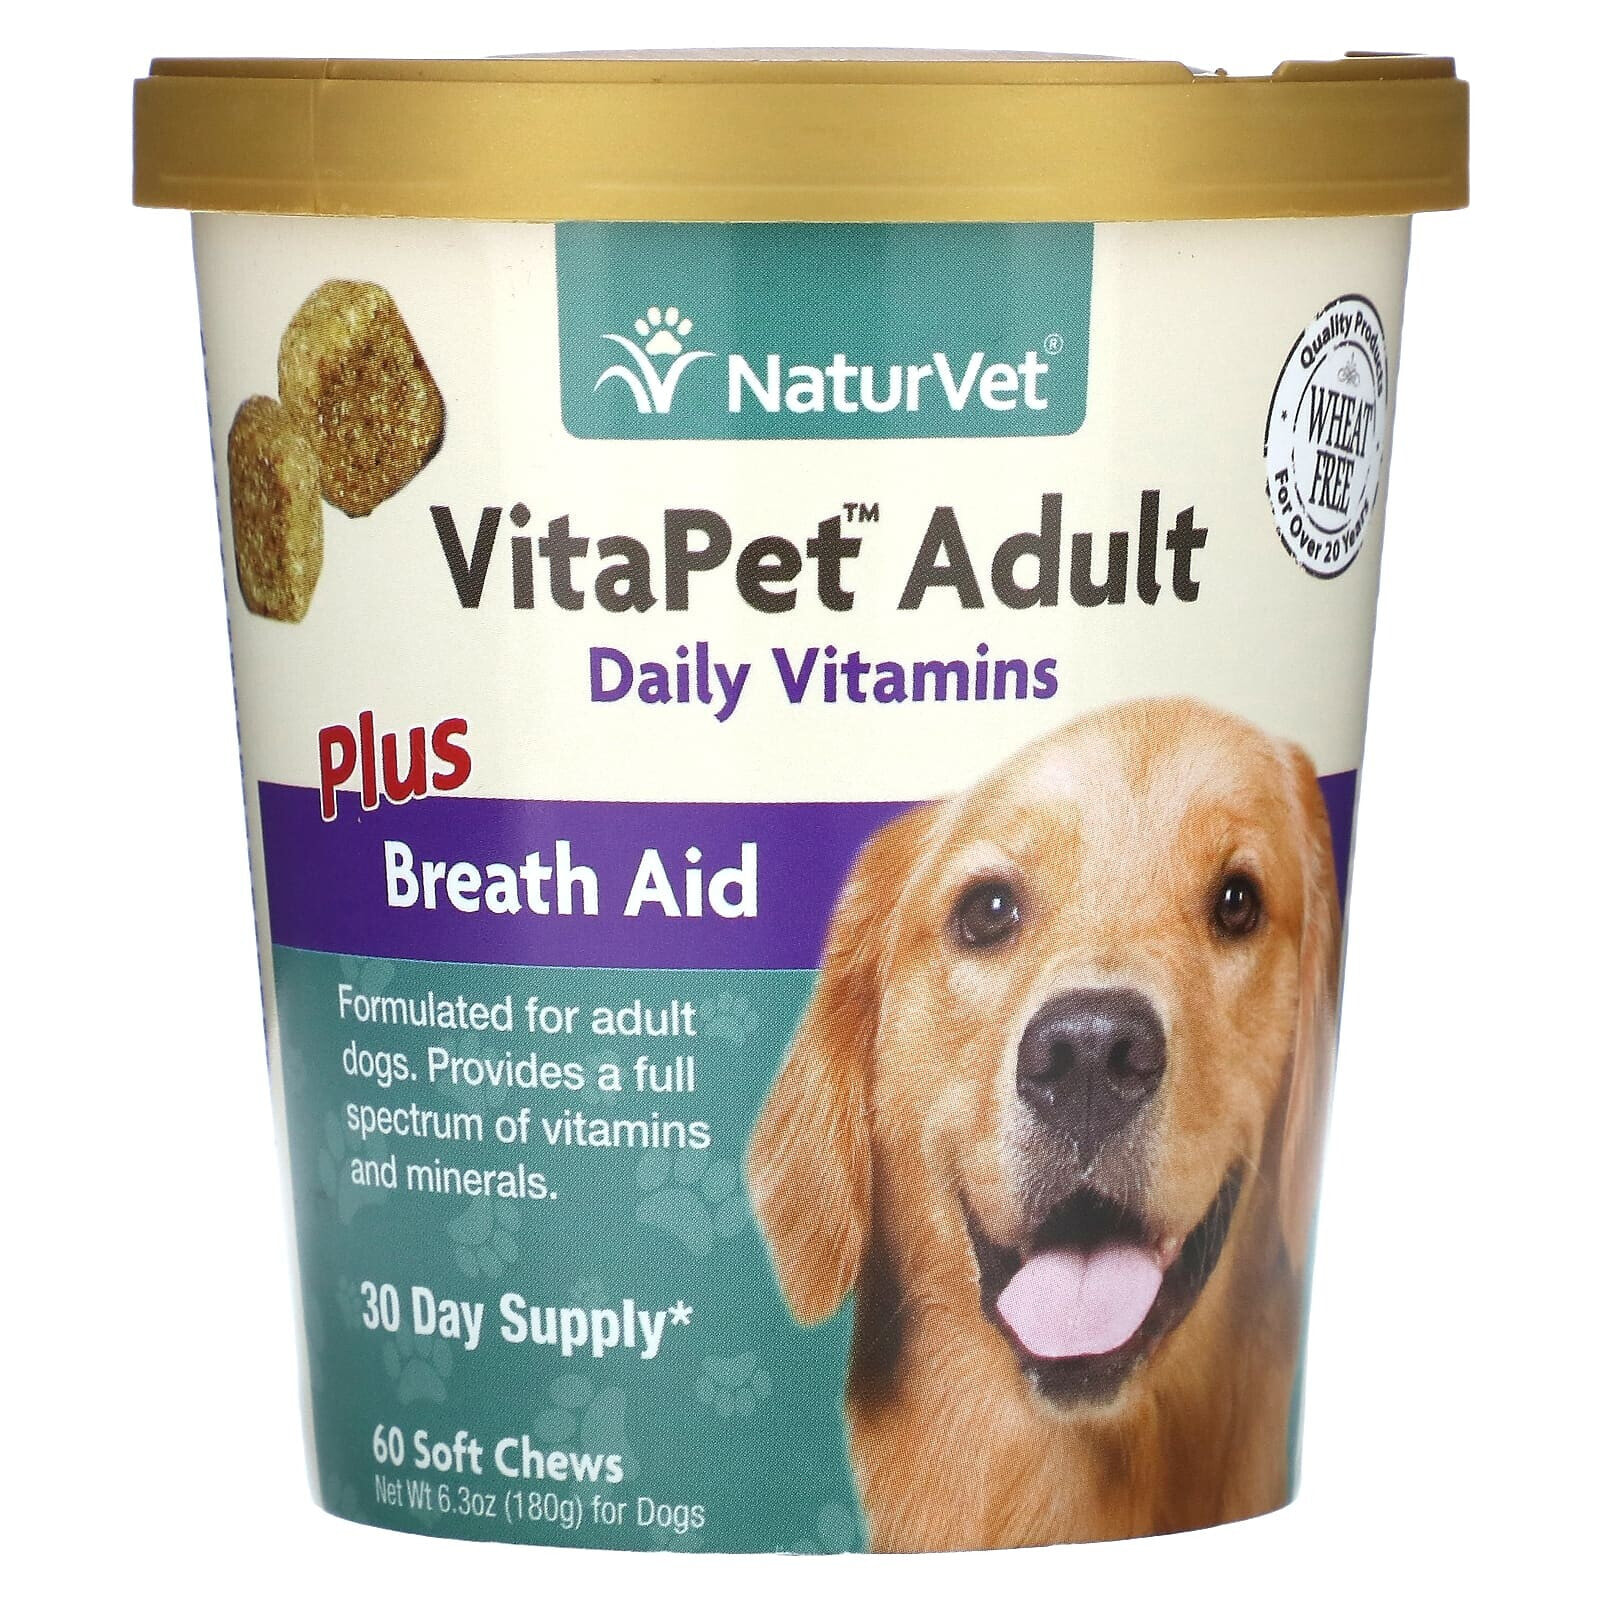 VitaPet Adult, Daily Vitamins + Breath Aid, For Dogs, 60 Soft Chews, 6.3 oz (180 g)